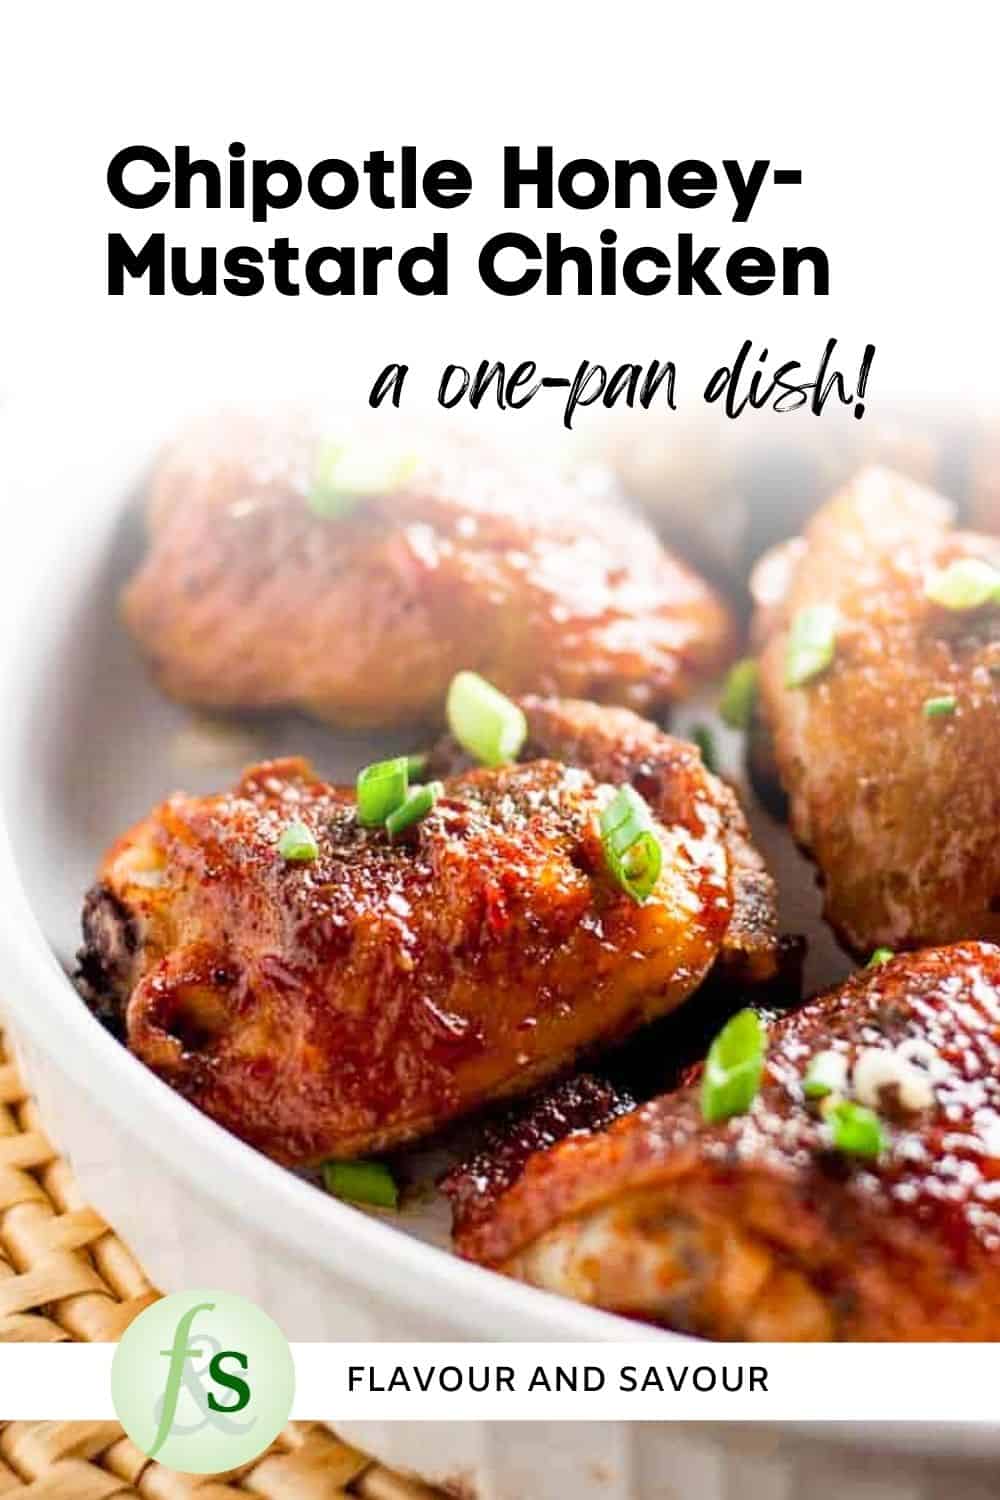 Image with text for Chipotle Honey-Mustard Glazed Chicken.